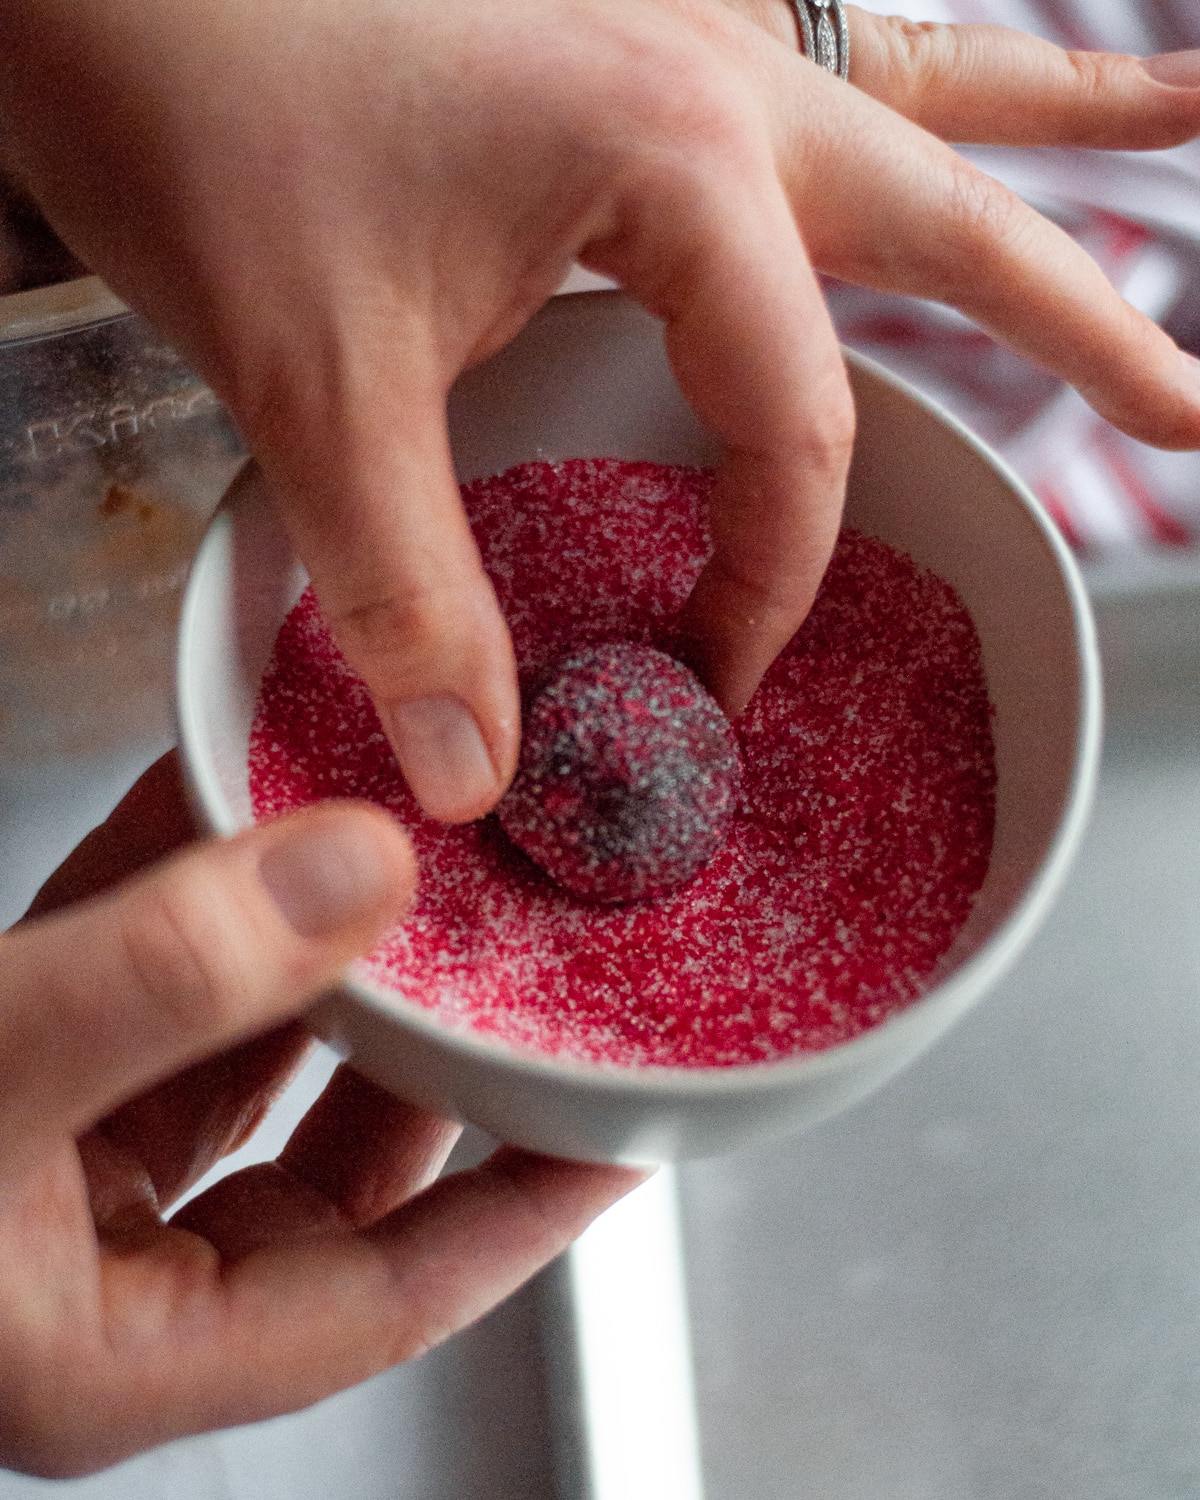 A chocolate dough ball being dipped into the red and white sugar mixture.